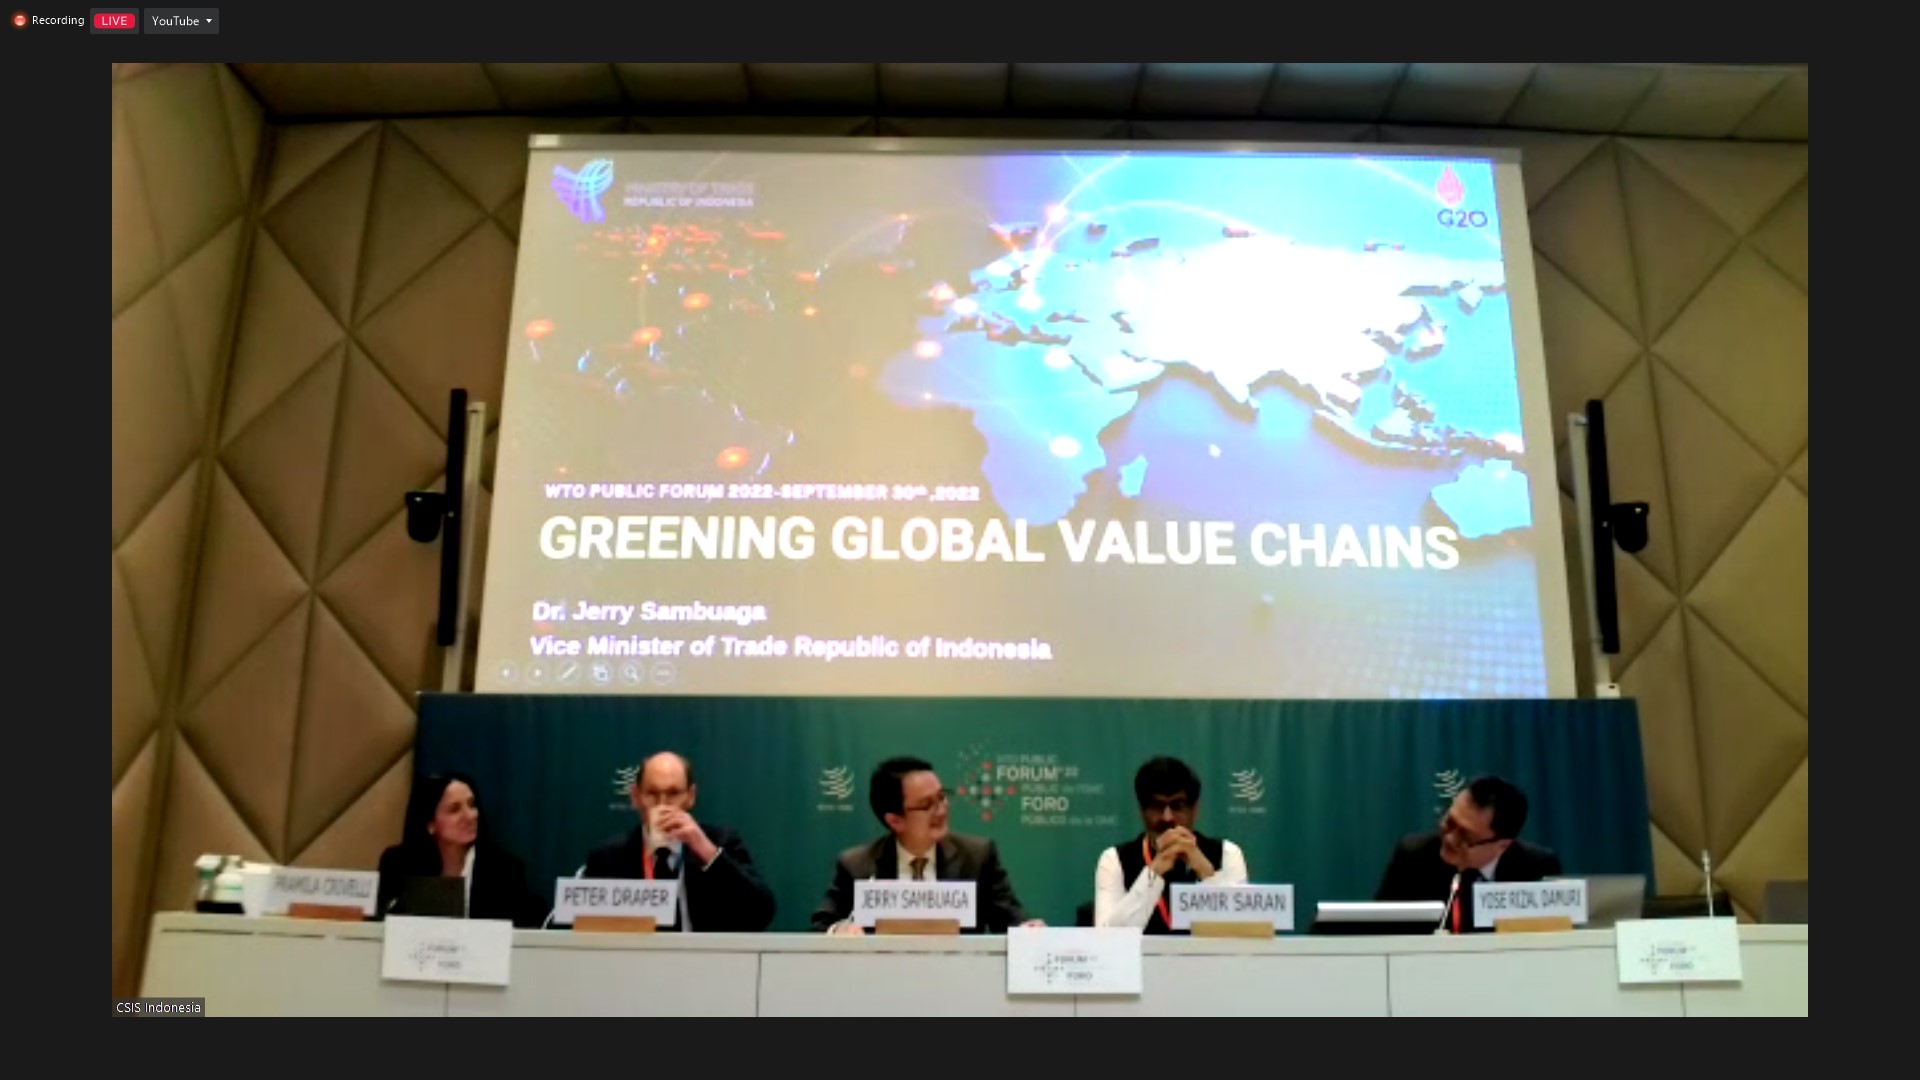 The head of department of CAERC participated in the panel discussion on "Greening of global value chains" of the Think-20 summit